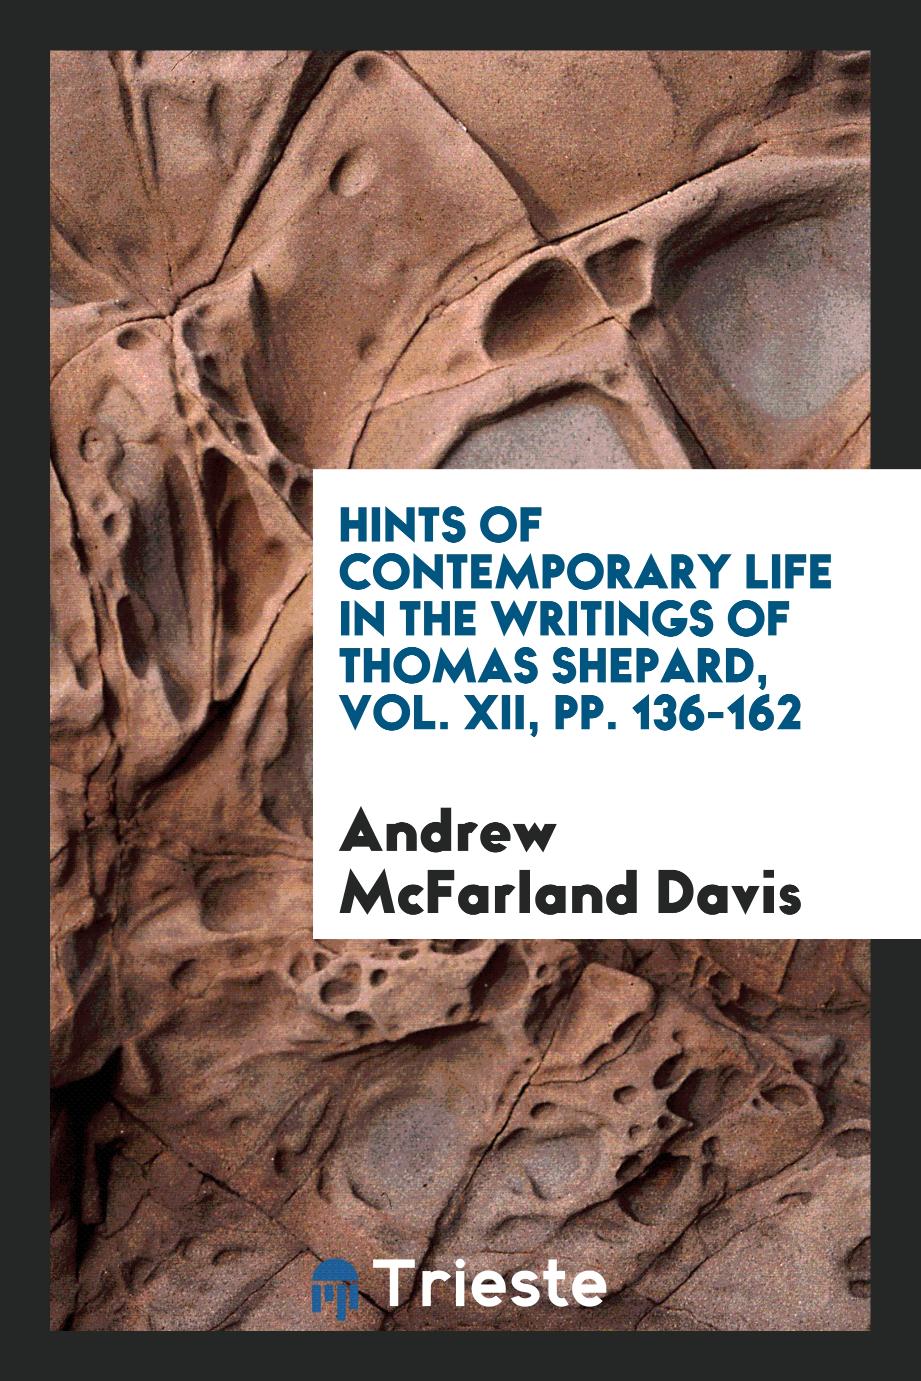 Hints of contemporary life in the writings of Thomas Shepard, Vol. XII, pp. 136-162